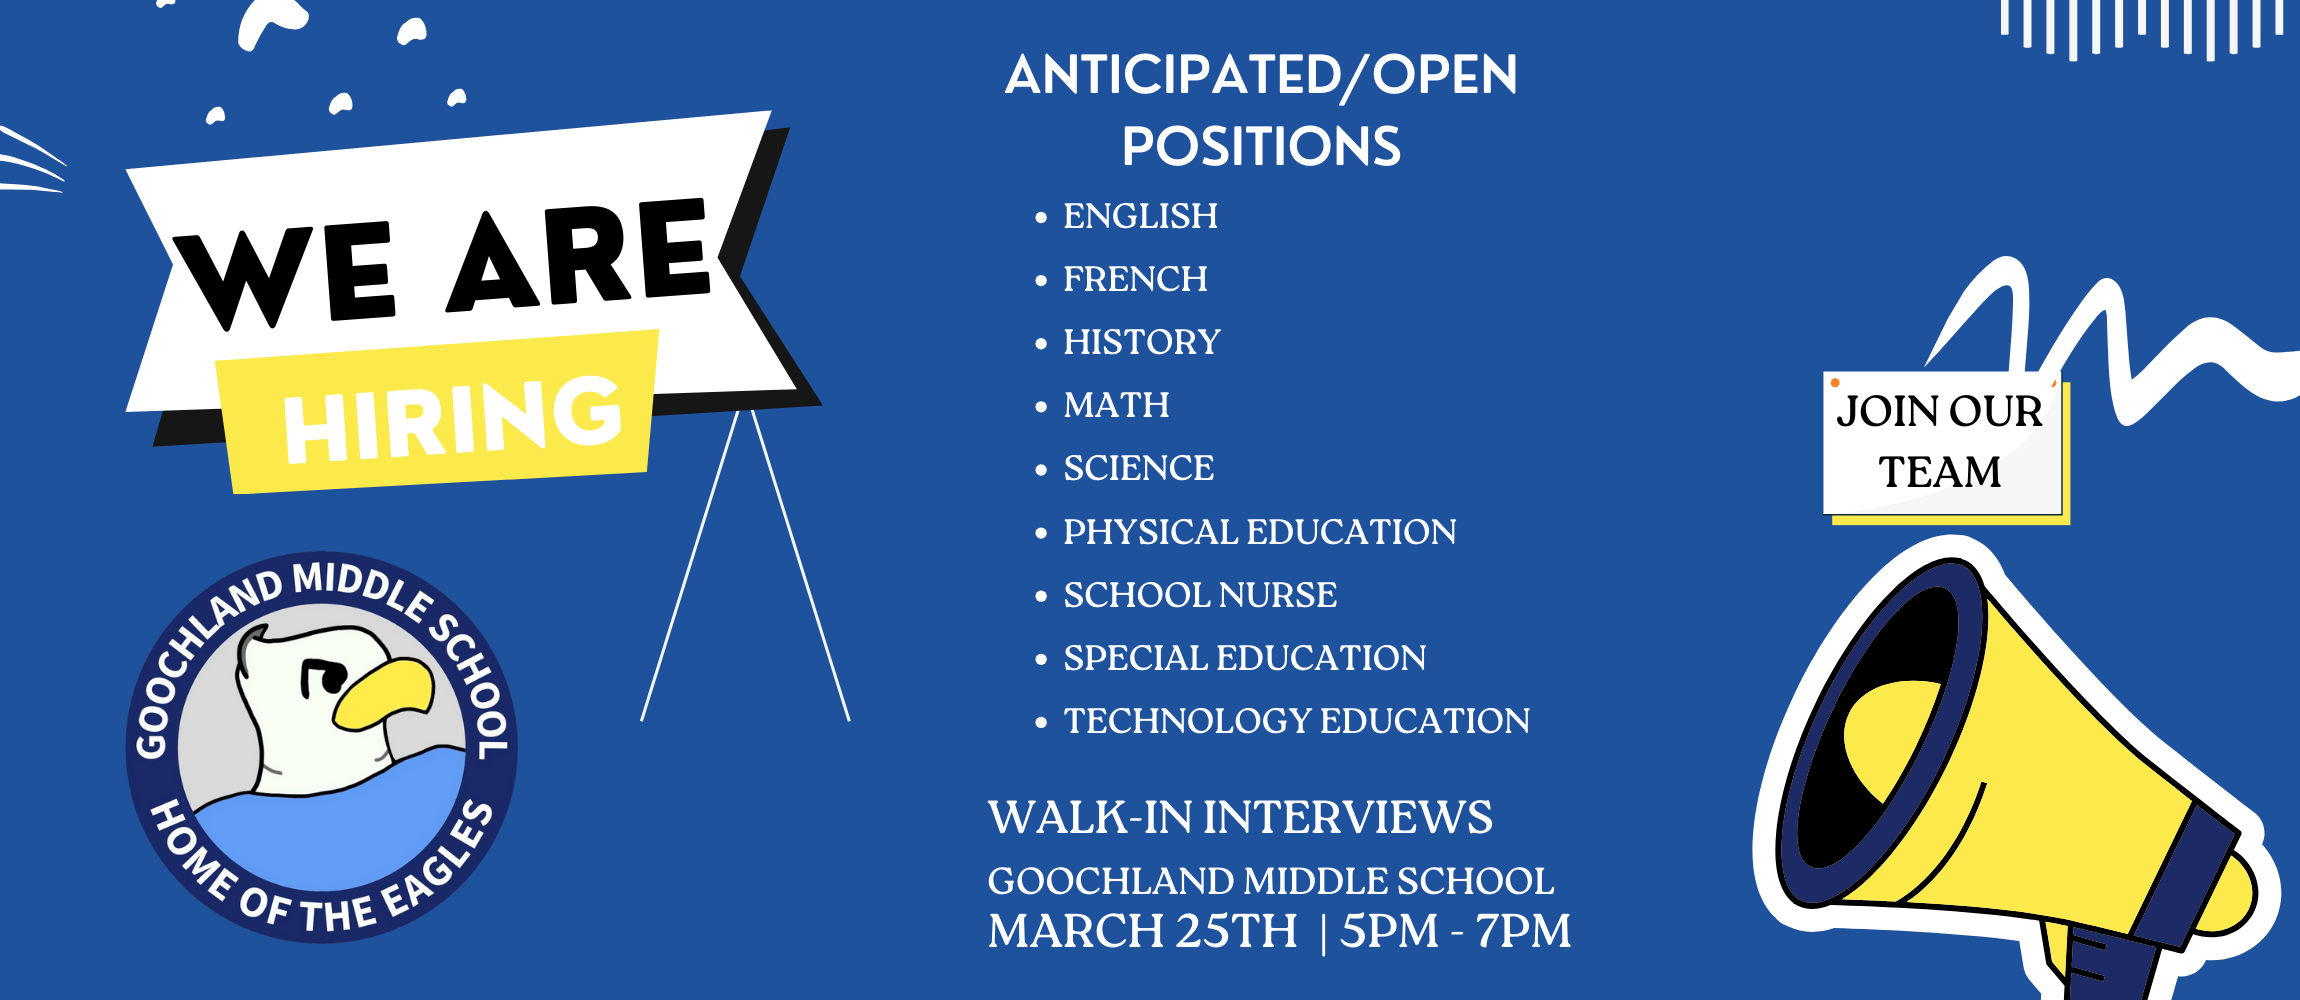 We Are Hiring! Anticipated positions english french history math science PHYSICAL EDUCATION school nurse special education  TECHNOLOGY EDUCATION. Walk-in interviews GMS MARCH 25TH  | 5PM - 7PM